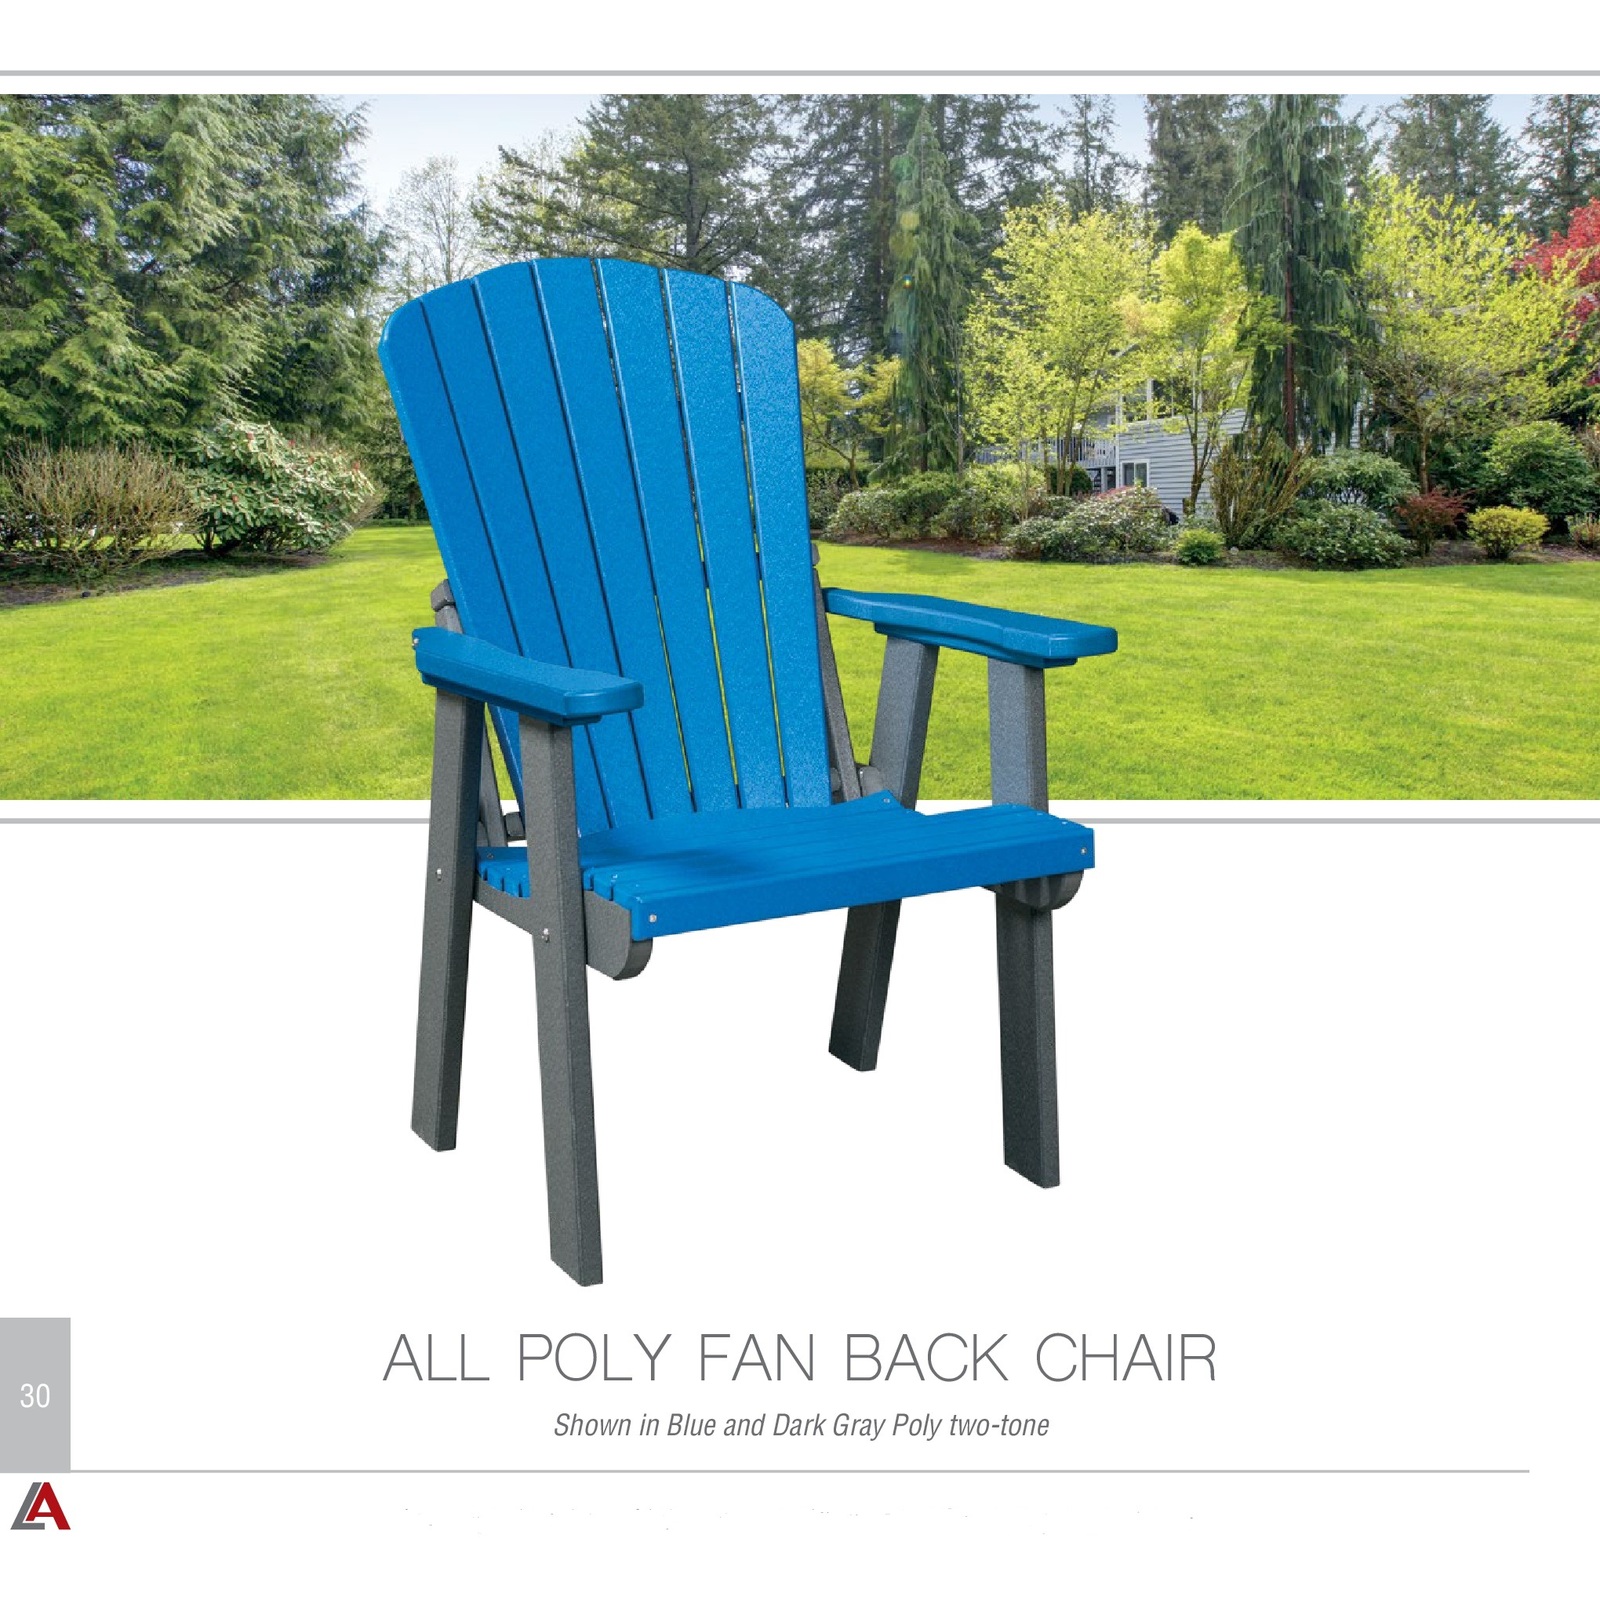 Primary image for All Polyurethane Fan Back Chair